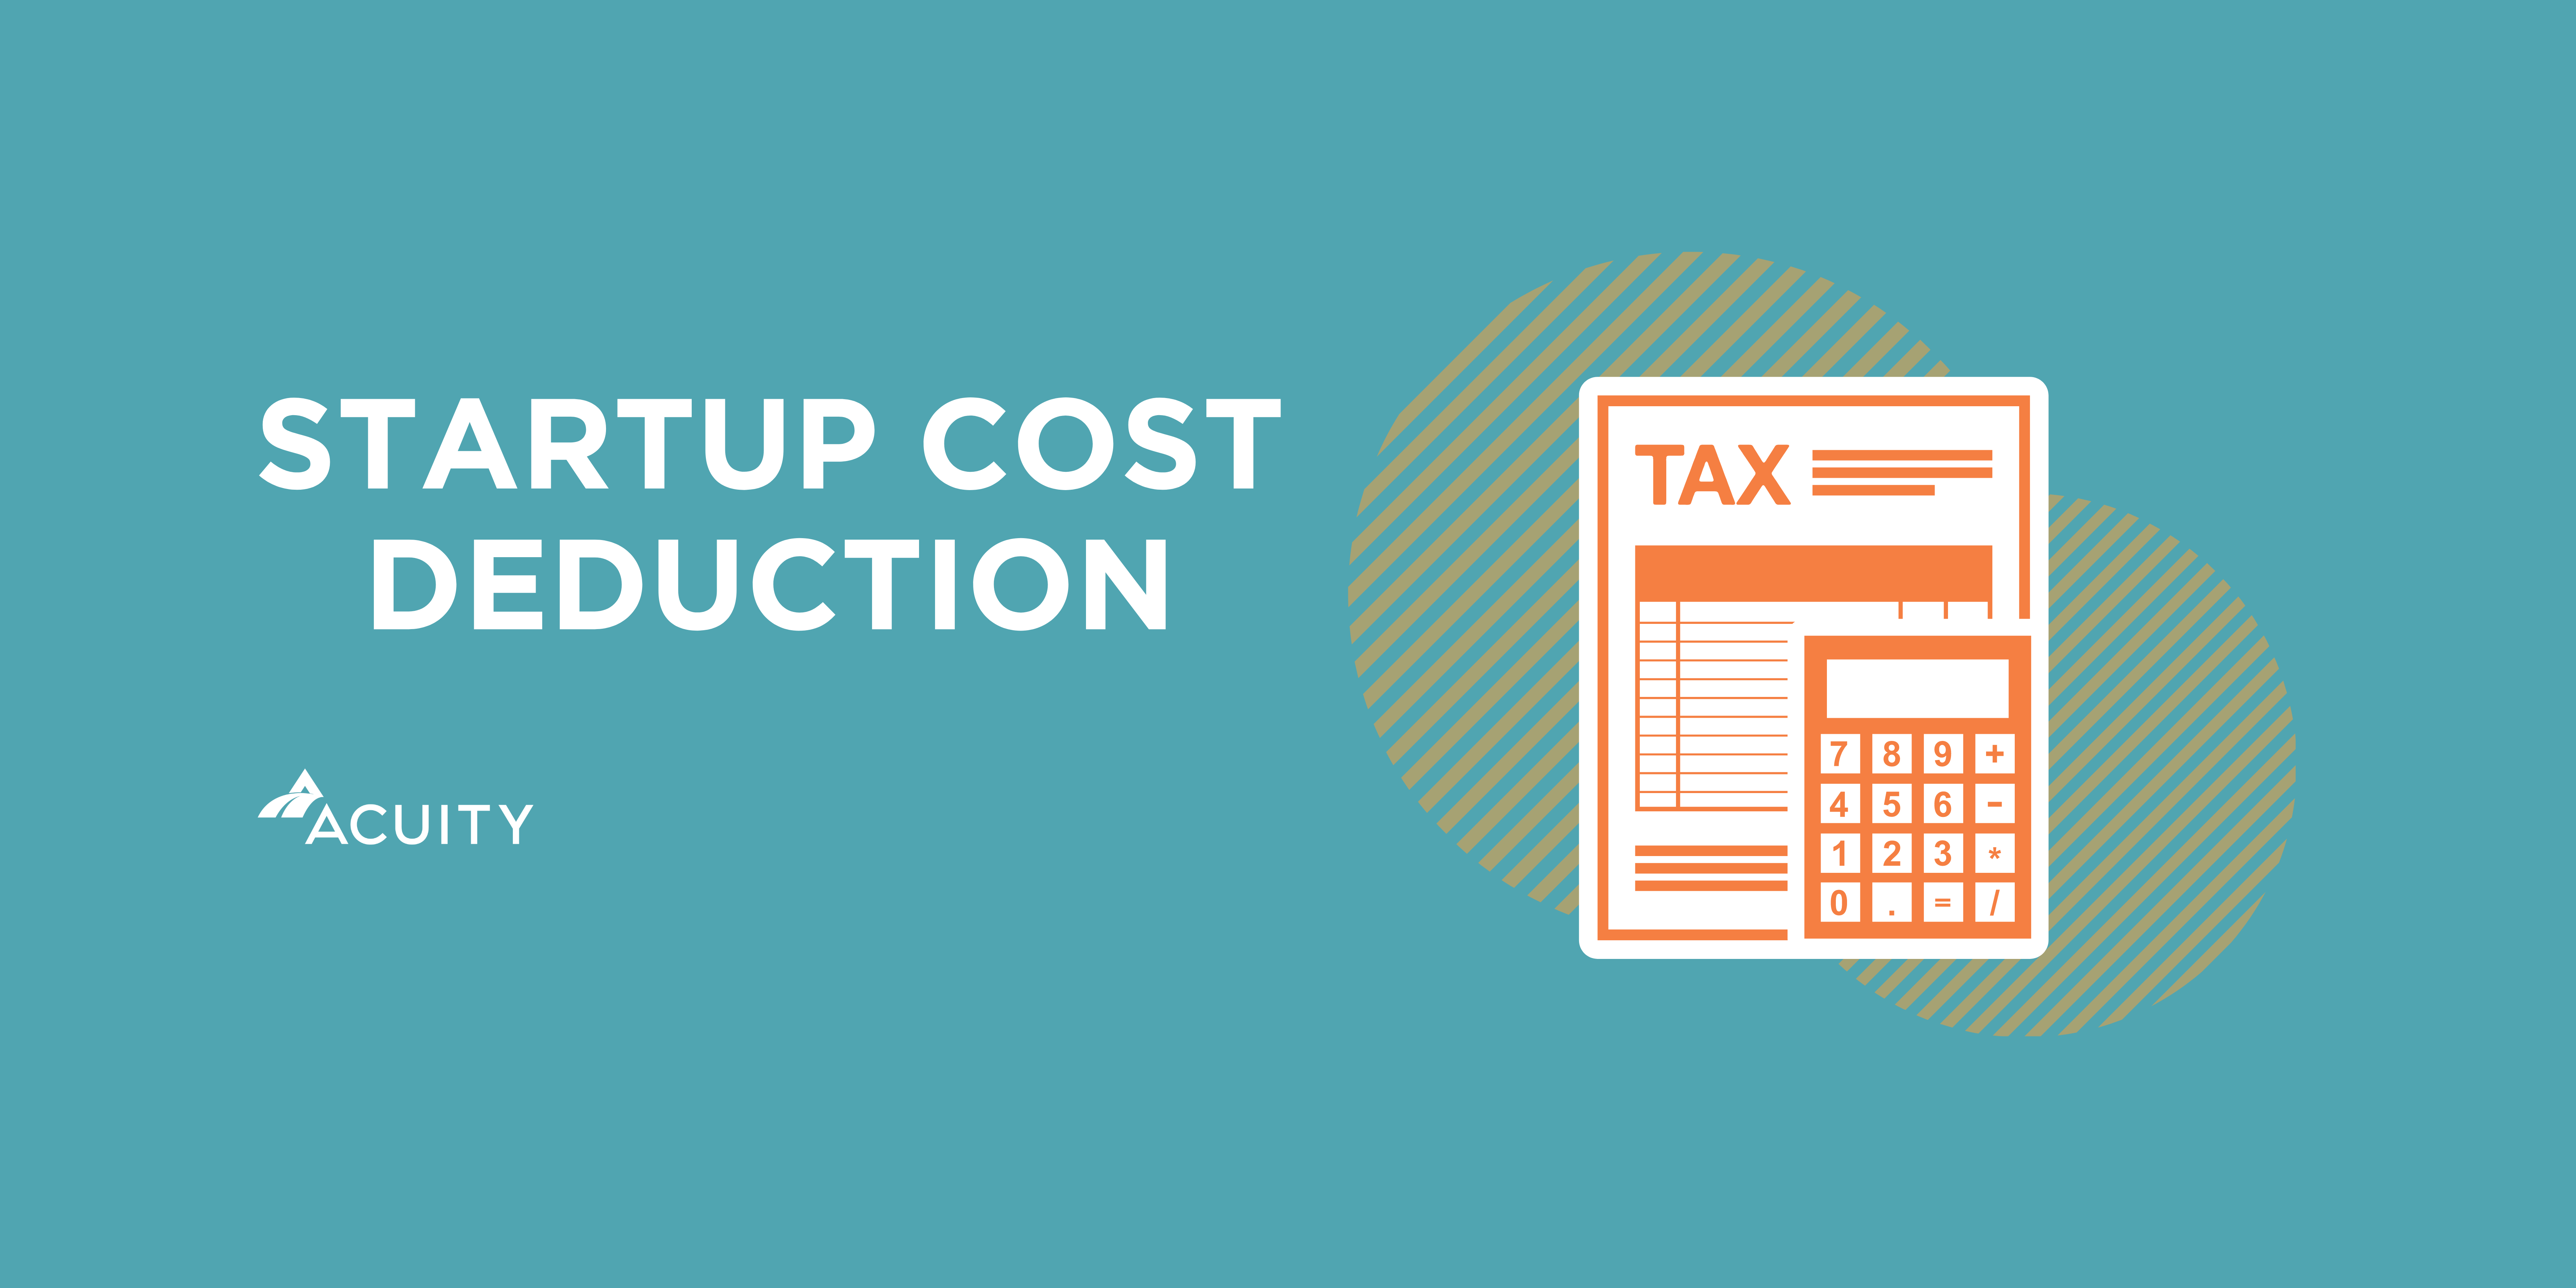 Startup Cost Deduction Tax Blog Banner 2